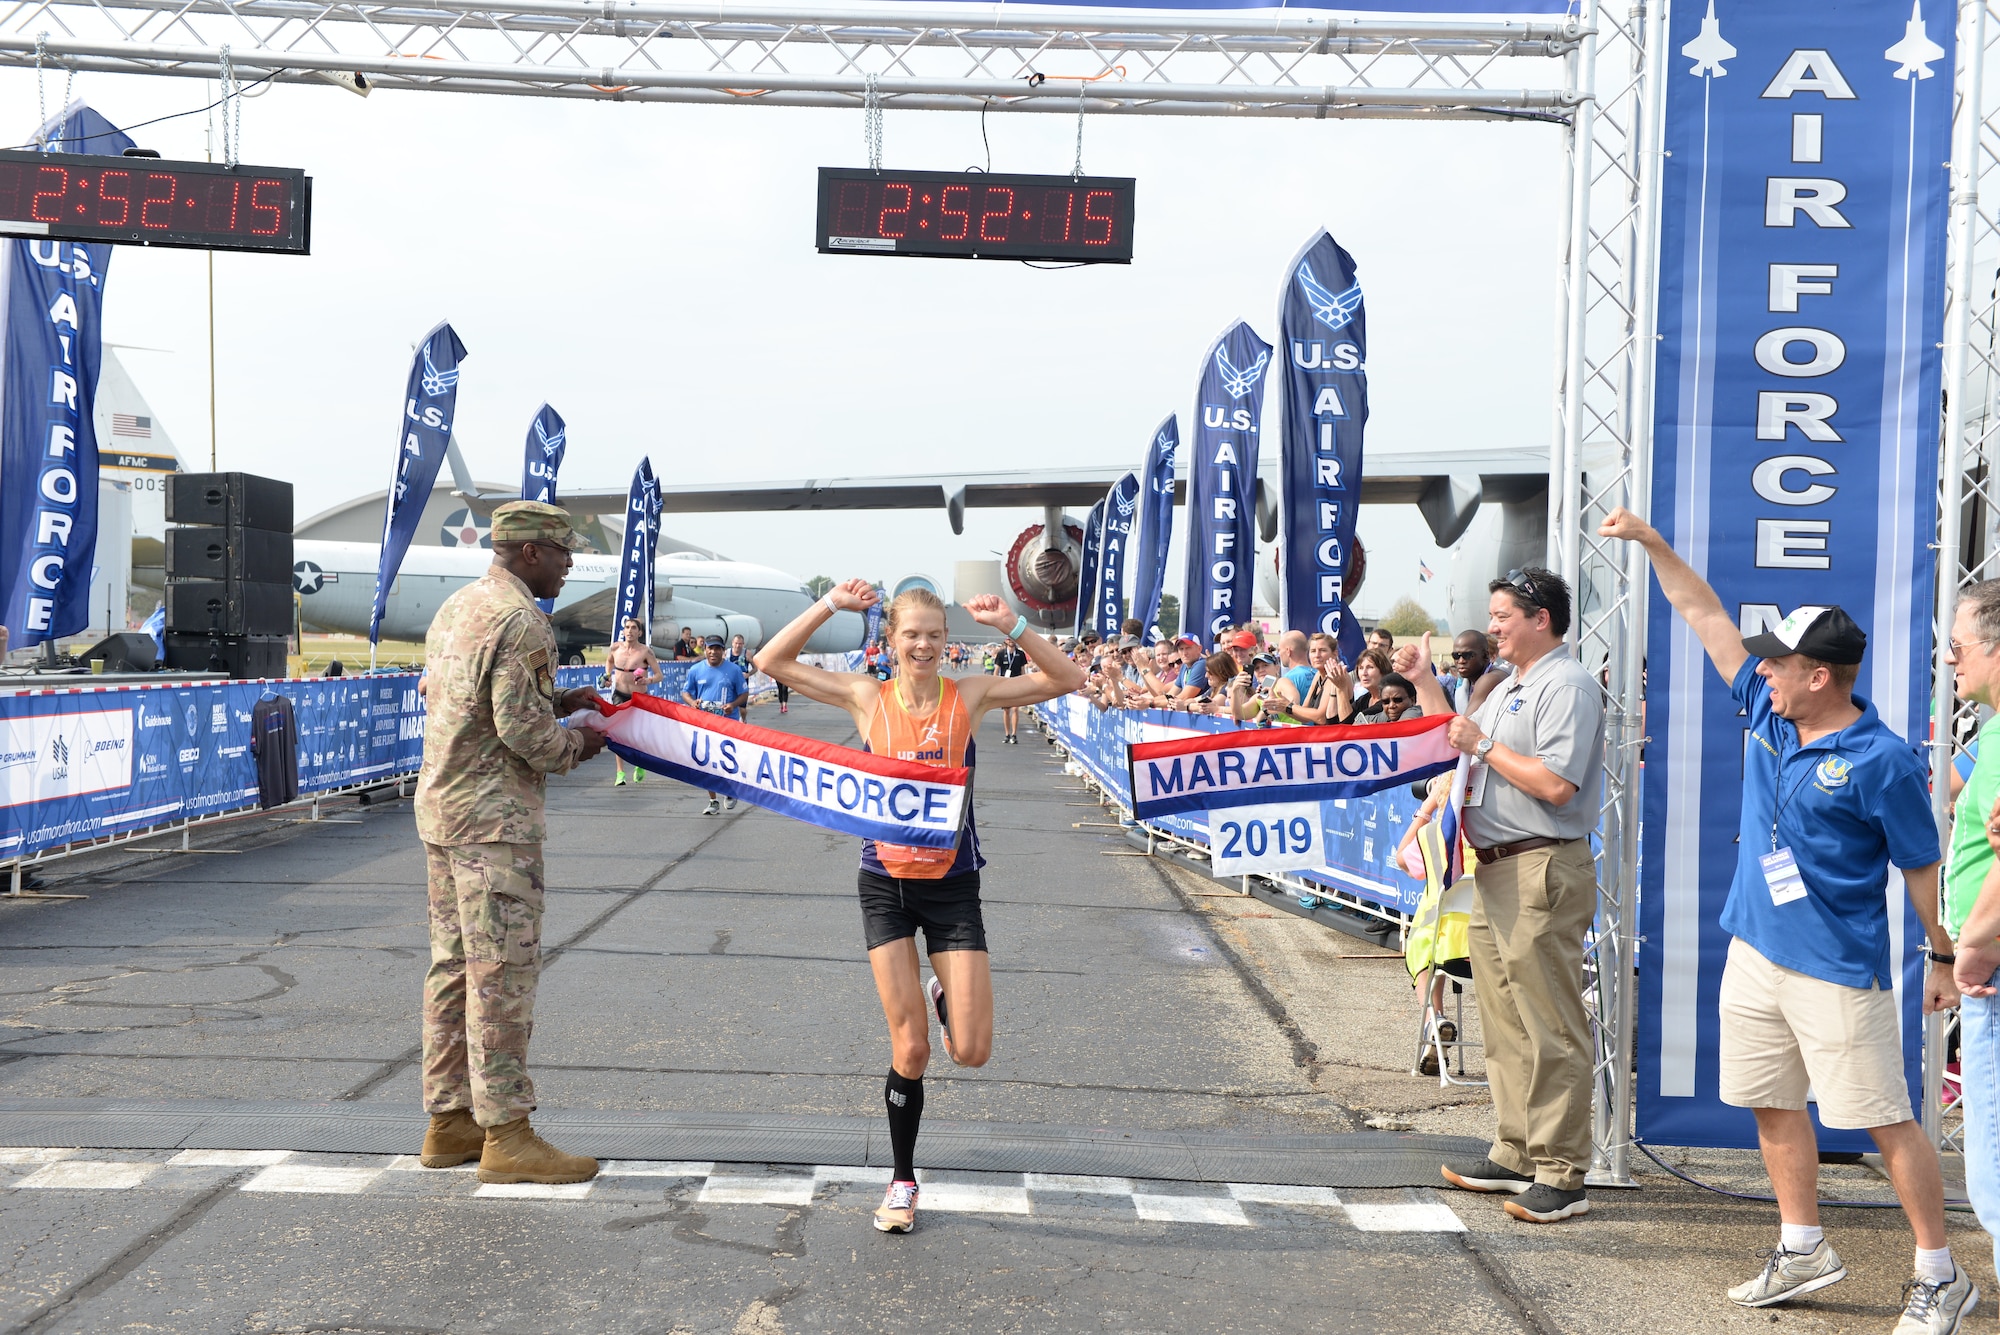 Ann Alyanak of Bellbrook crosses the line at 2:52:15 capturing the Women's title for the 2019 Air Force Marathon.(U.S. Air Force photo/Wesley Farnsworth)